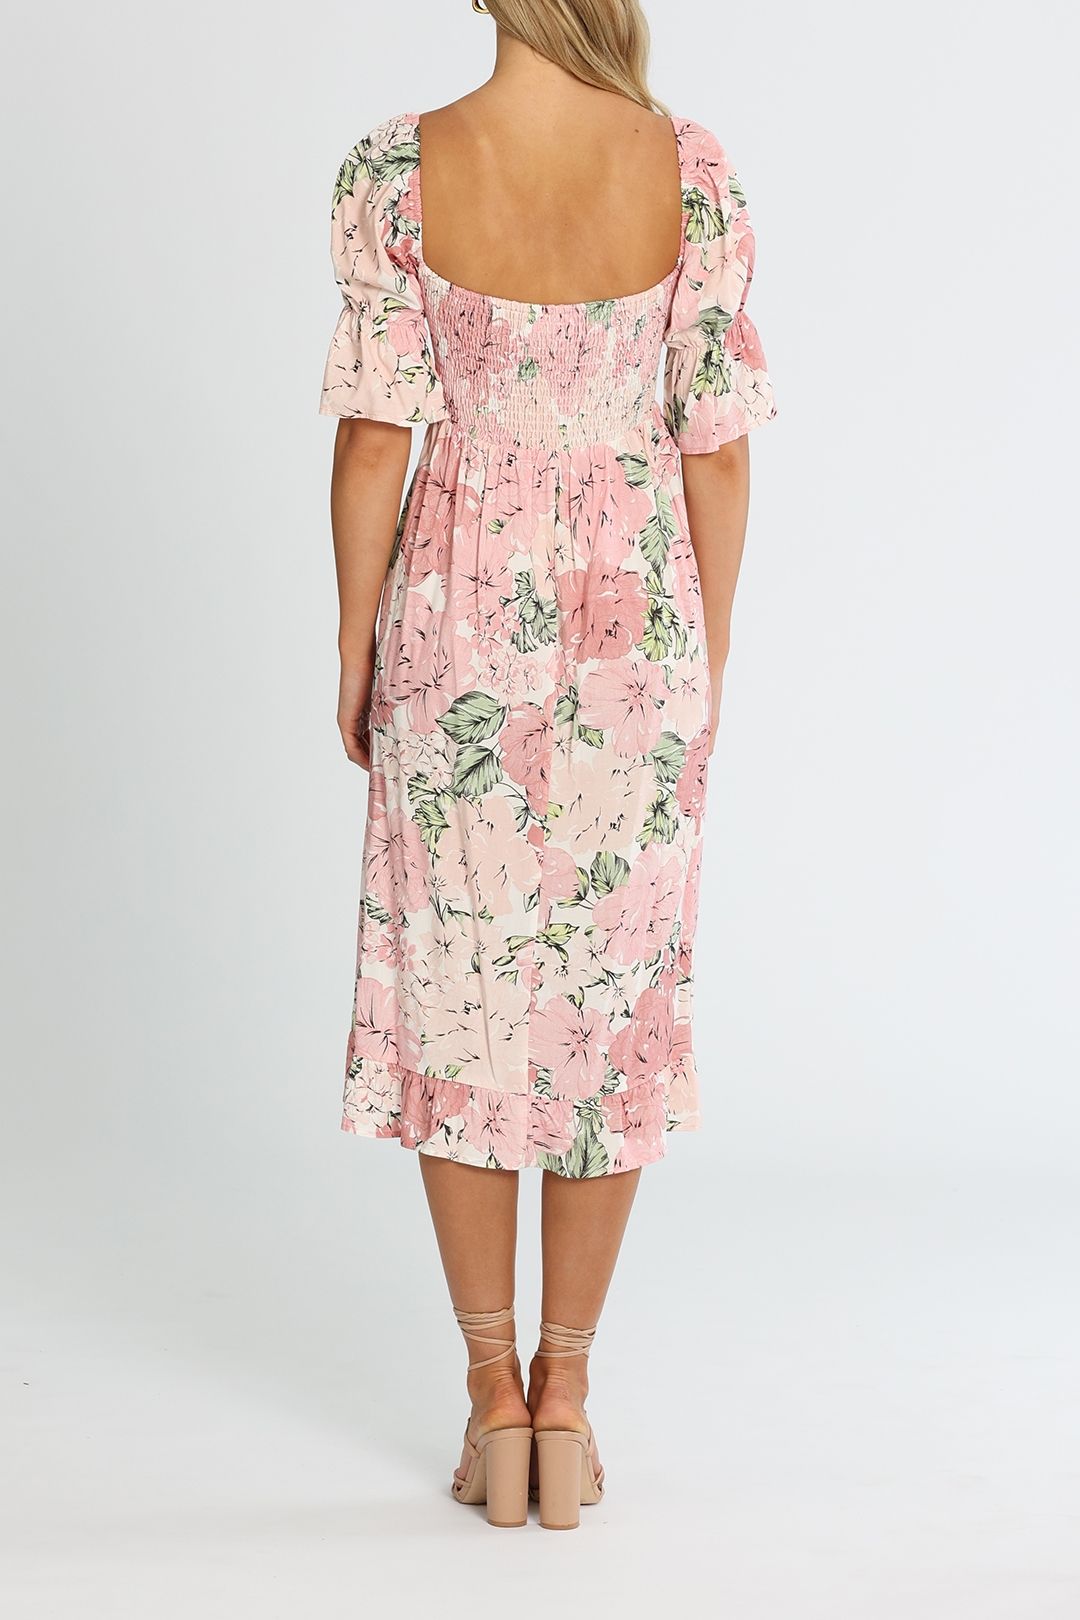 Girl and the Sun Soleil Midi Dress Pink Floral Print Shirred Bodice